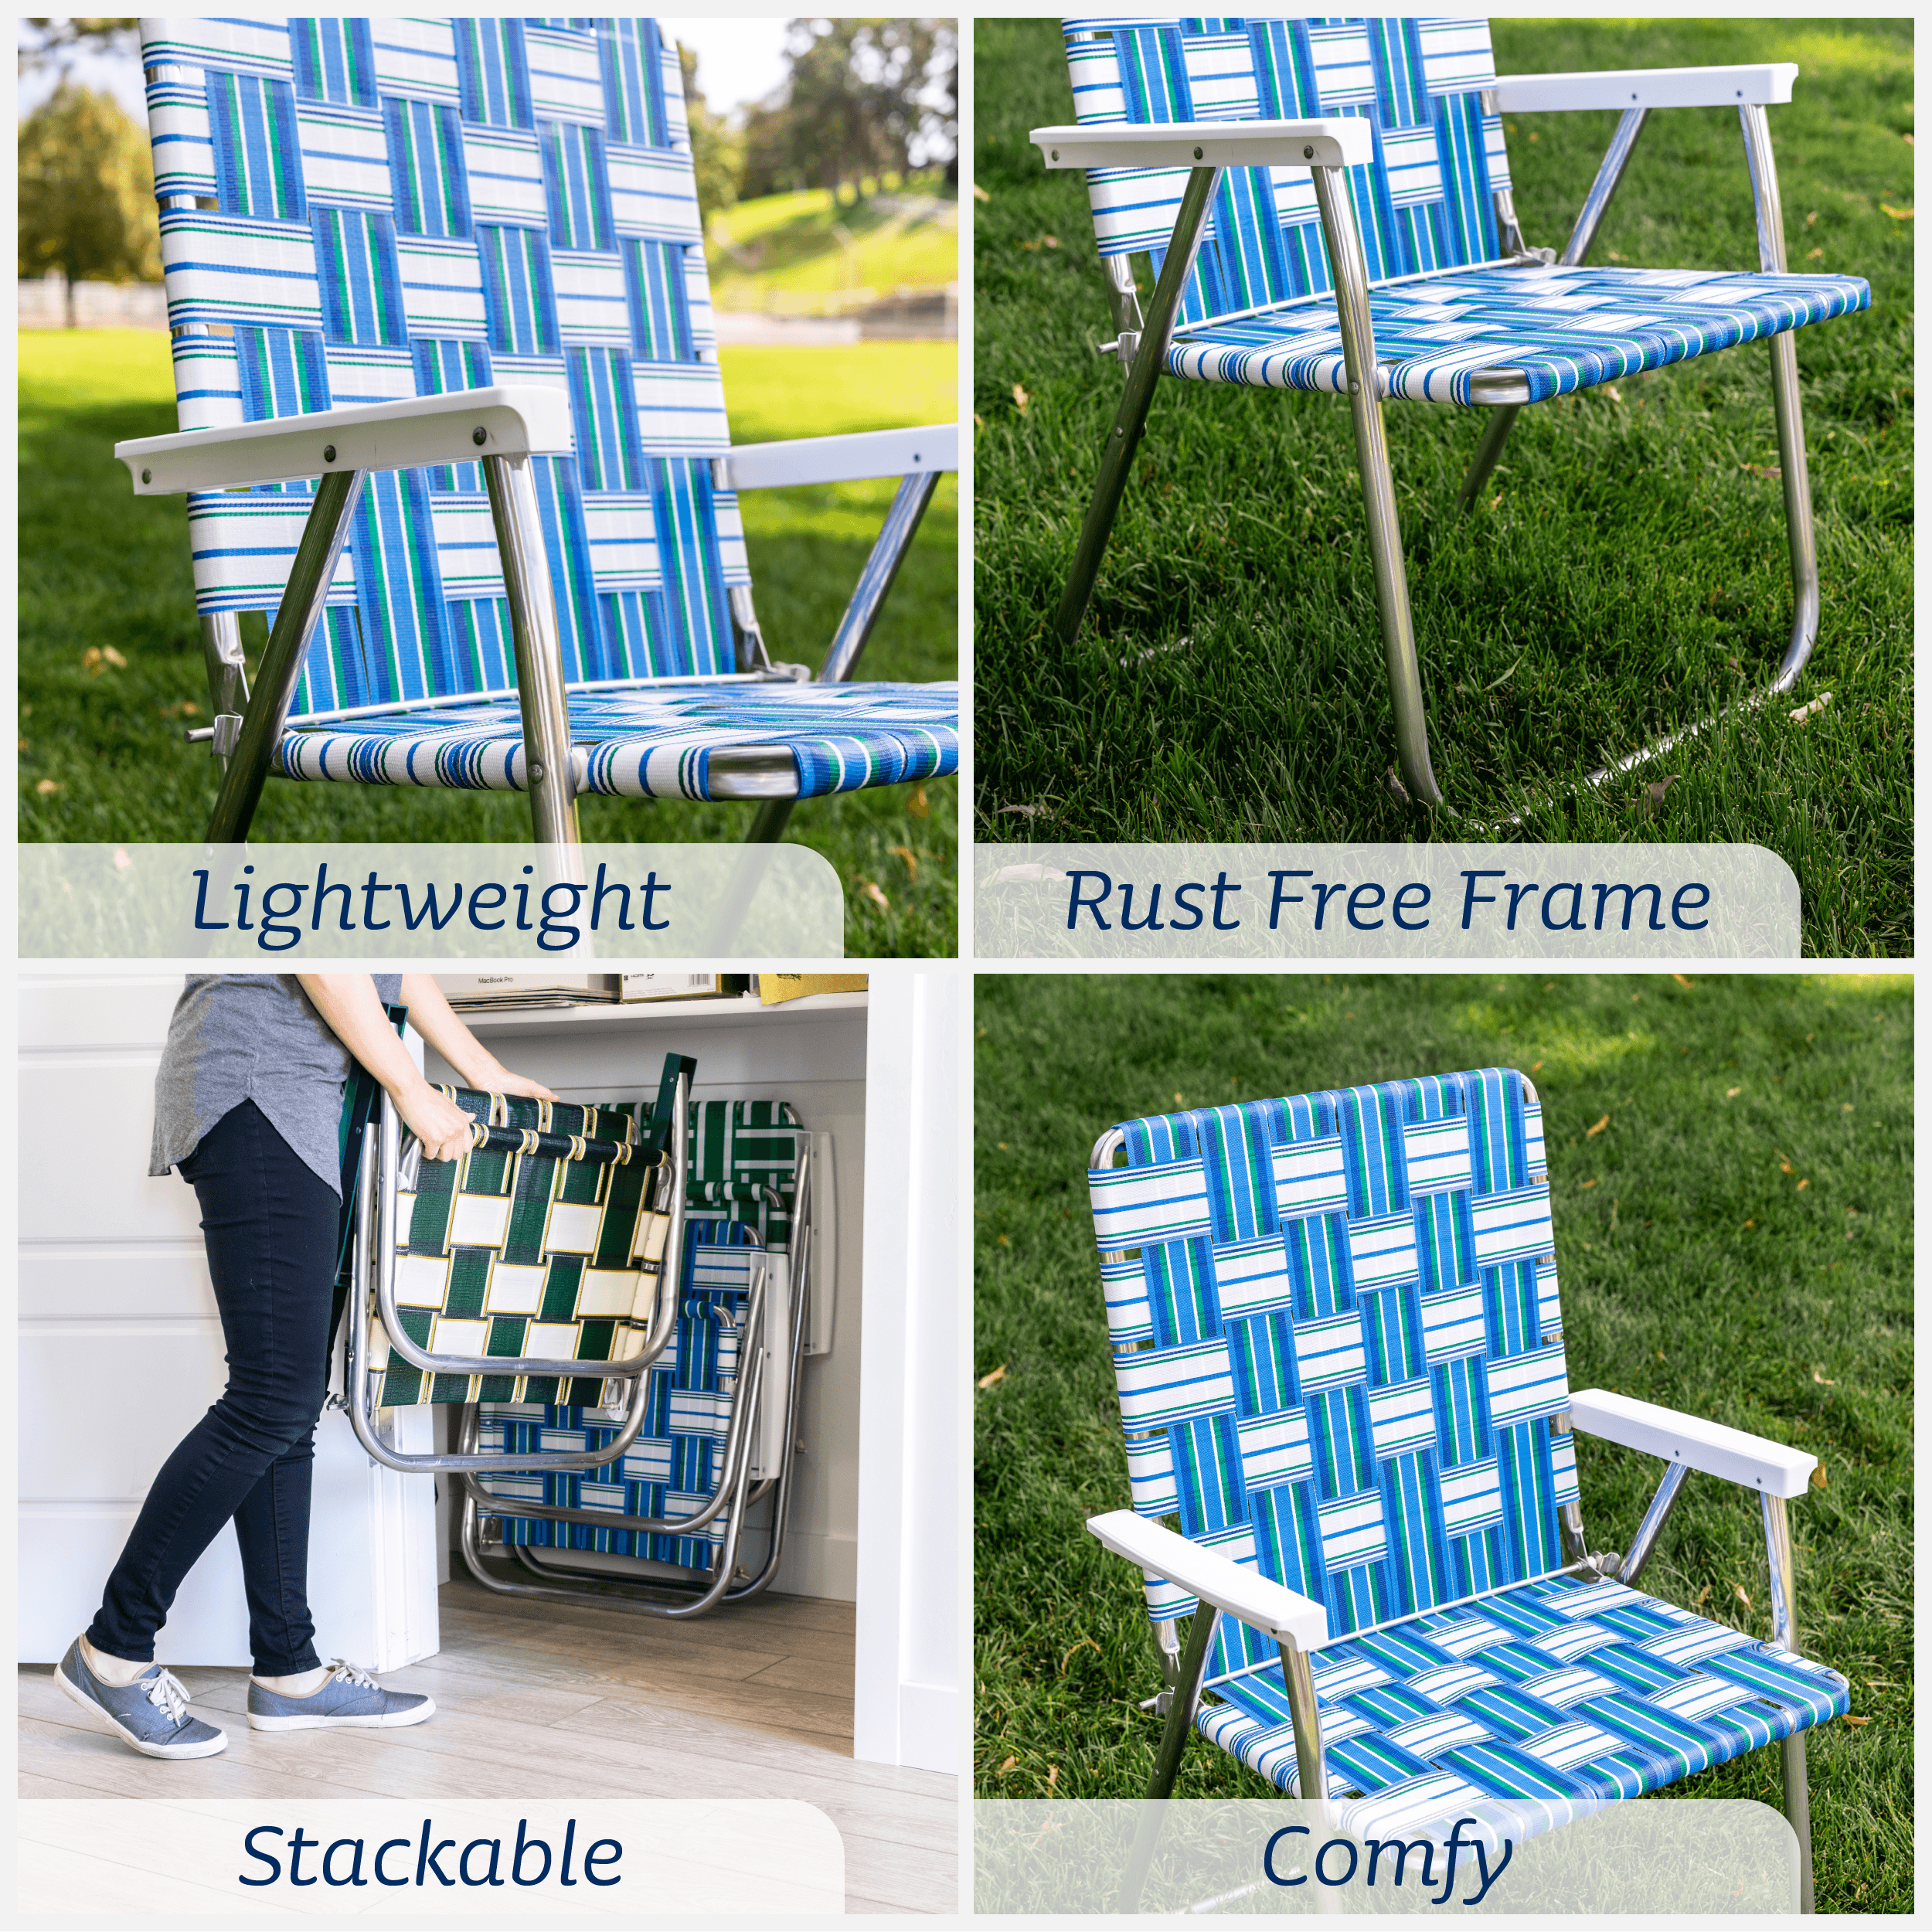 Lawn Chair USA - Classic Folding Aluminum Webbed Chair - Durable, Portable, and Comfortable Outdoor Chair - Ideal for Camping, Sports, and Concerts - Blue Wave with Blue arms - image 5 of 7